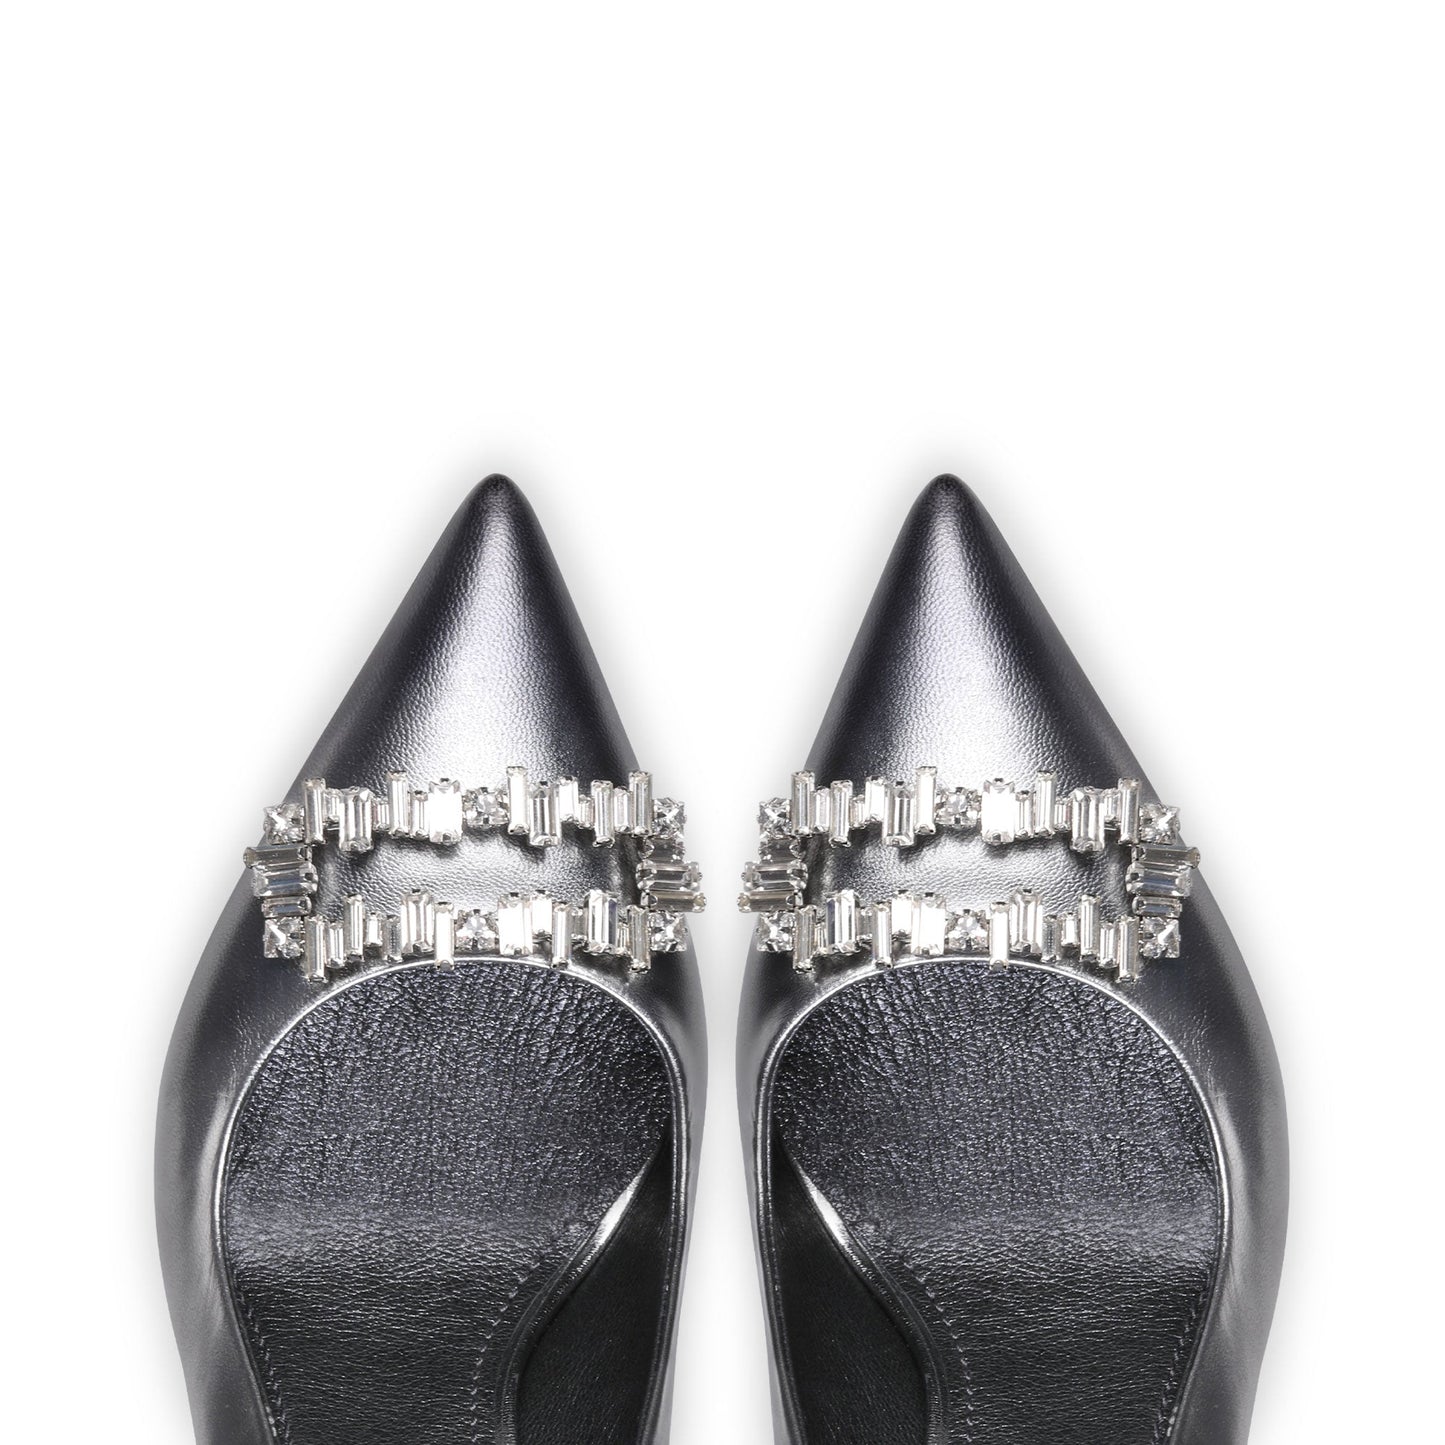 Silver pumps with a brooch